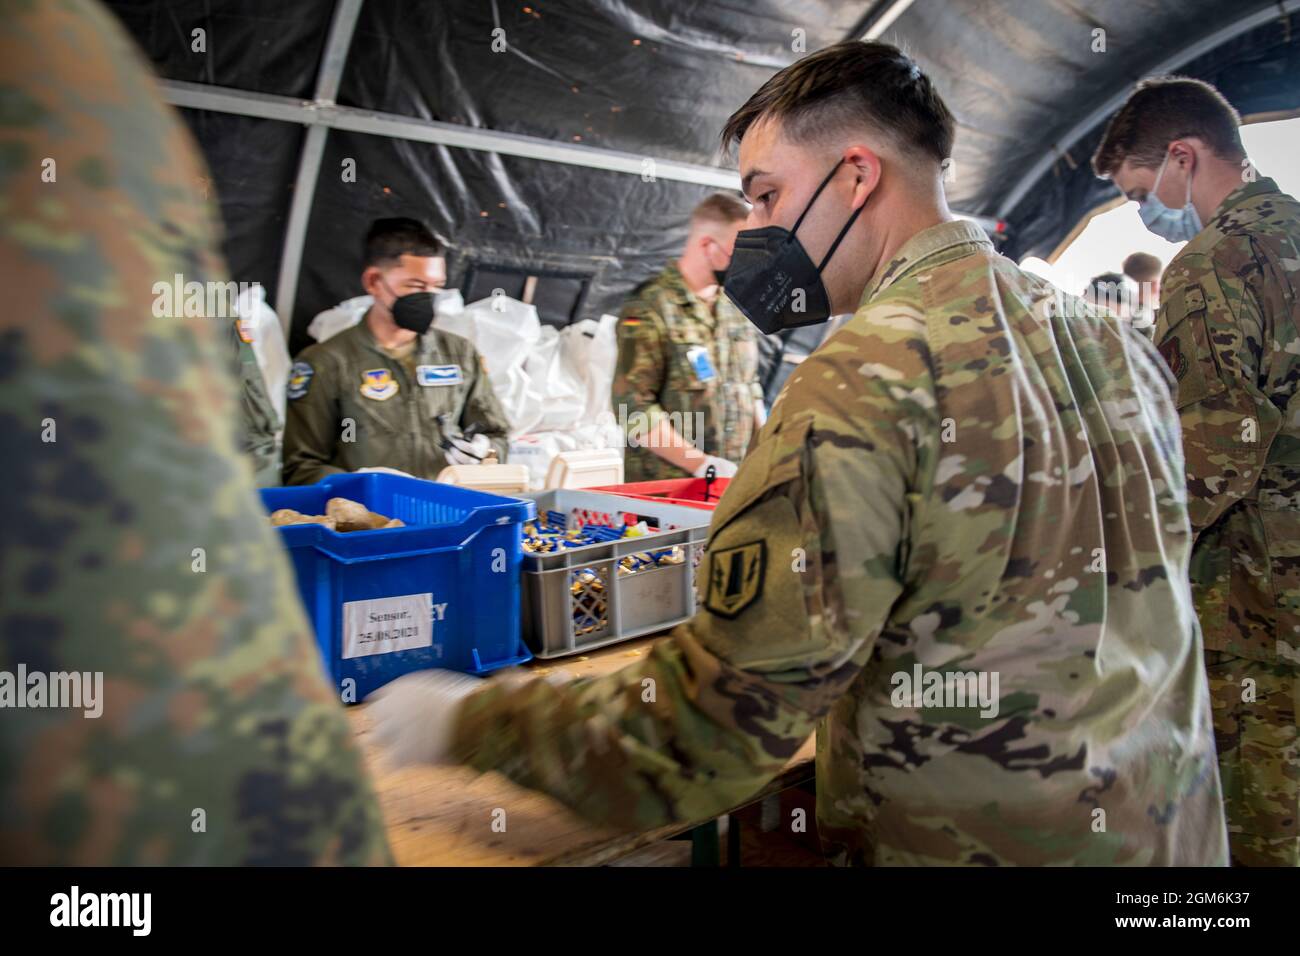 Service members from the U.S. Army and Air Force work shoulder to shoulder with soldiers from the German Bundeswehr to prepare meals for the Afghanistan evacuees. Ramstein Air Base is a transit center that provides a safe place for the evacuees to complete their paperwork while security and background checks are conducted before they continue on to their final destination. (U.S. Army photo by Staff Sgt. Thomas Mort) Stock Photo